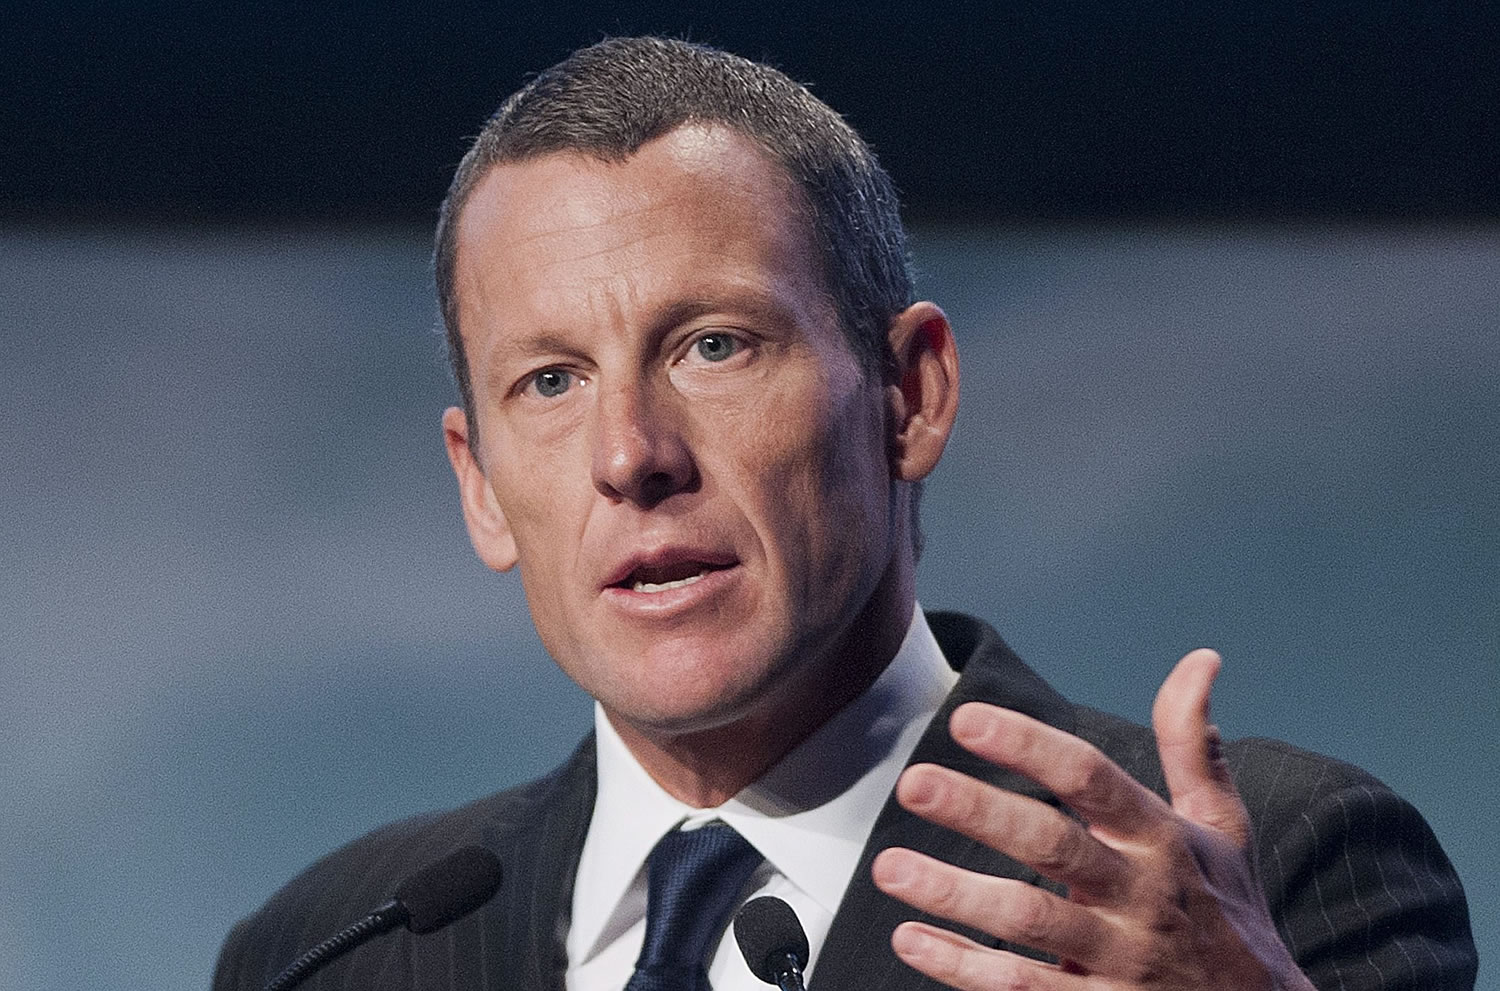 Lance Armstrong speaks to delegates at the World Cancer Congress in Montreal.